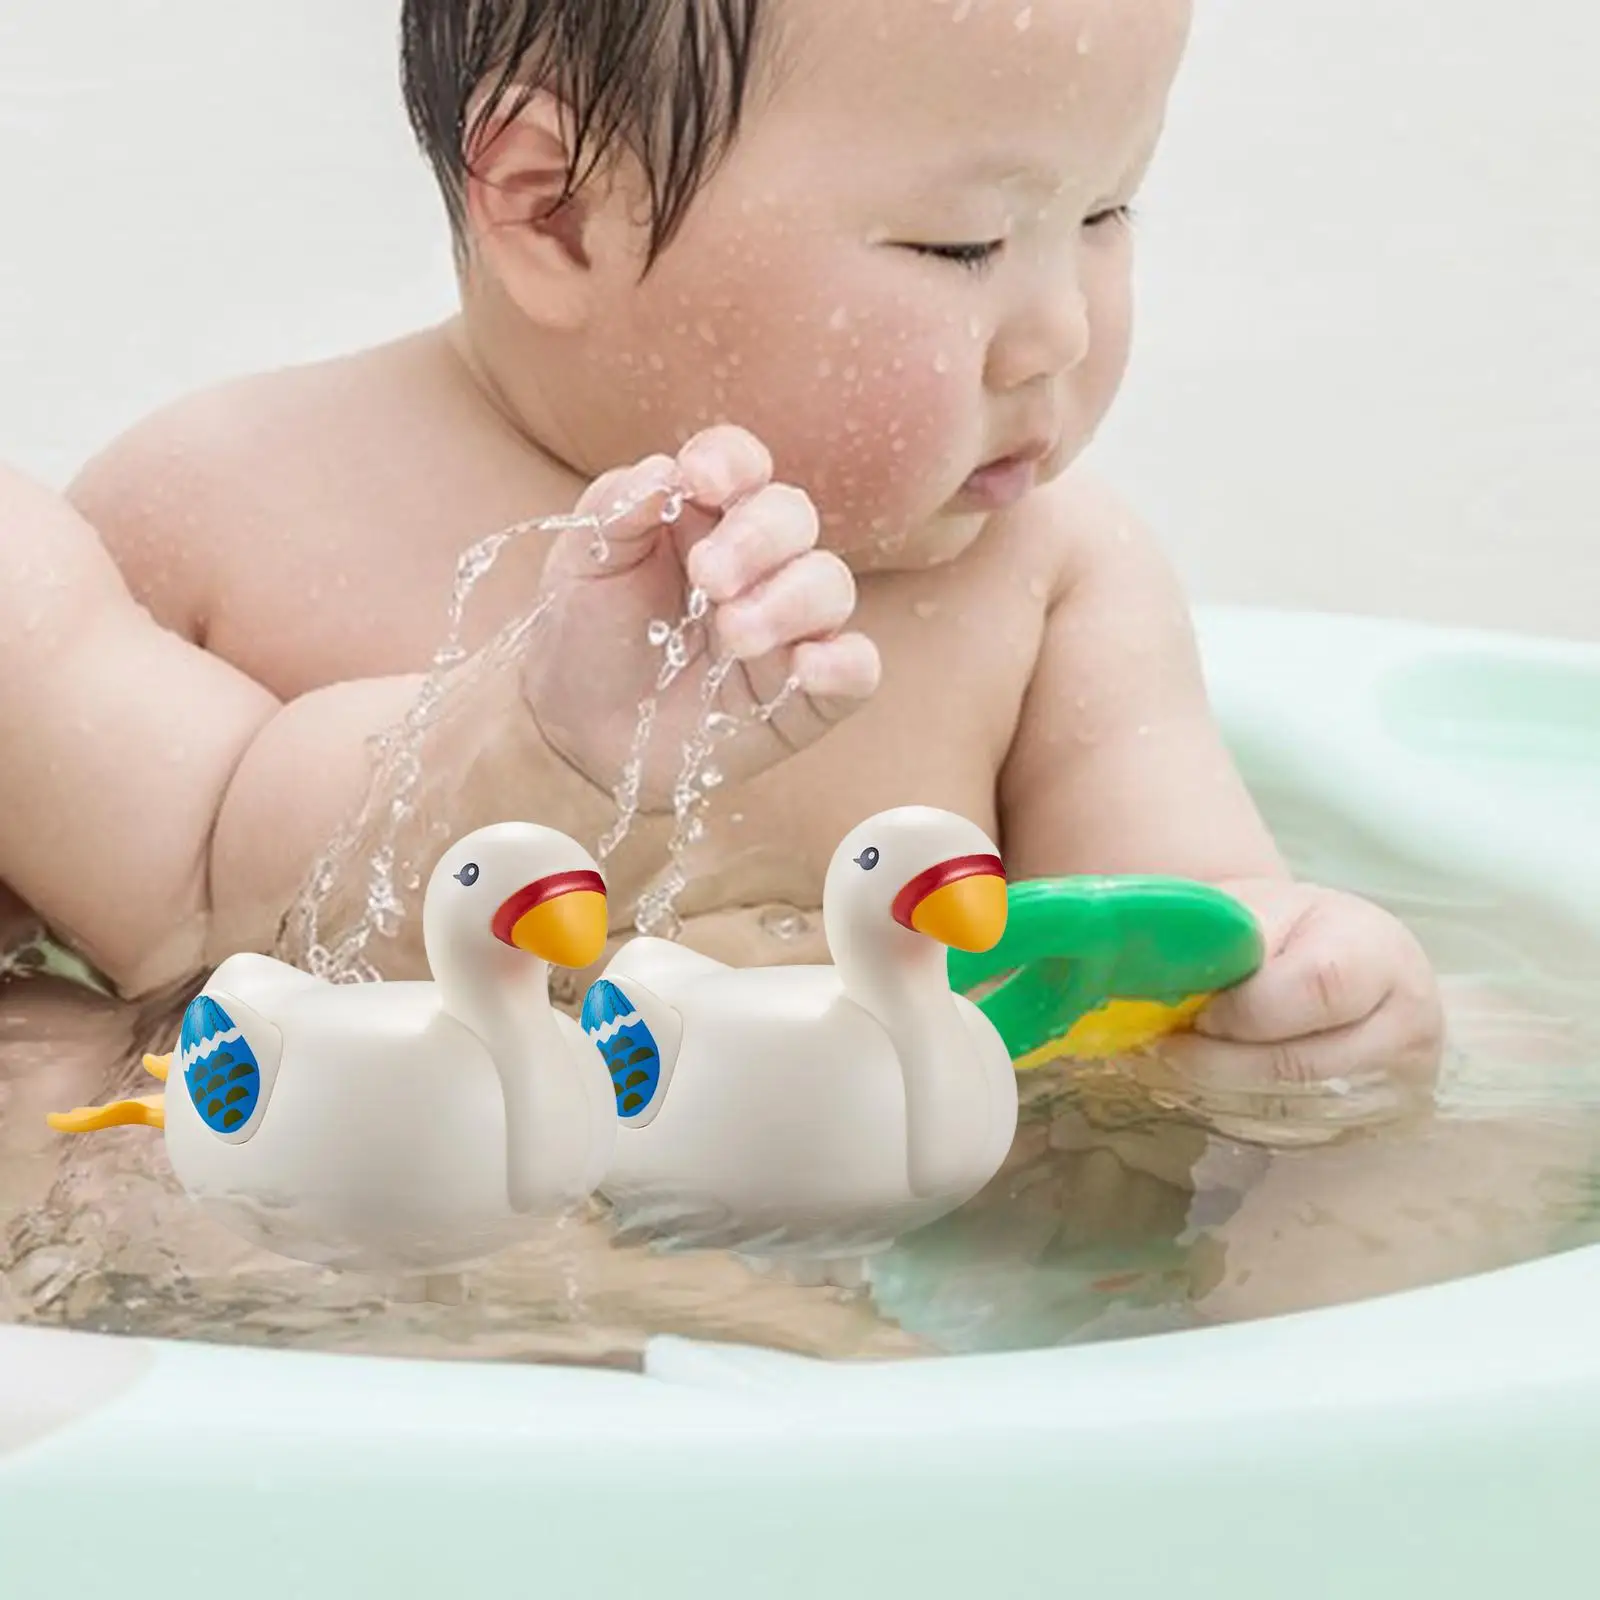 Swan Bath Toys Outdoor Activities Toy Water Toy Toddler Bath Toy for Toddlers